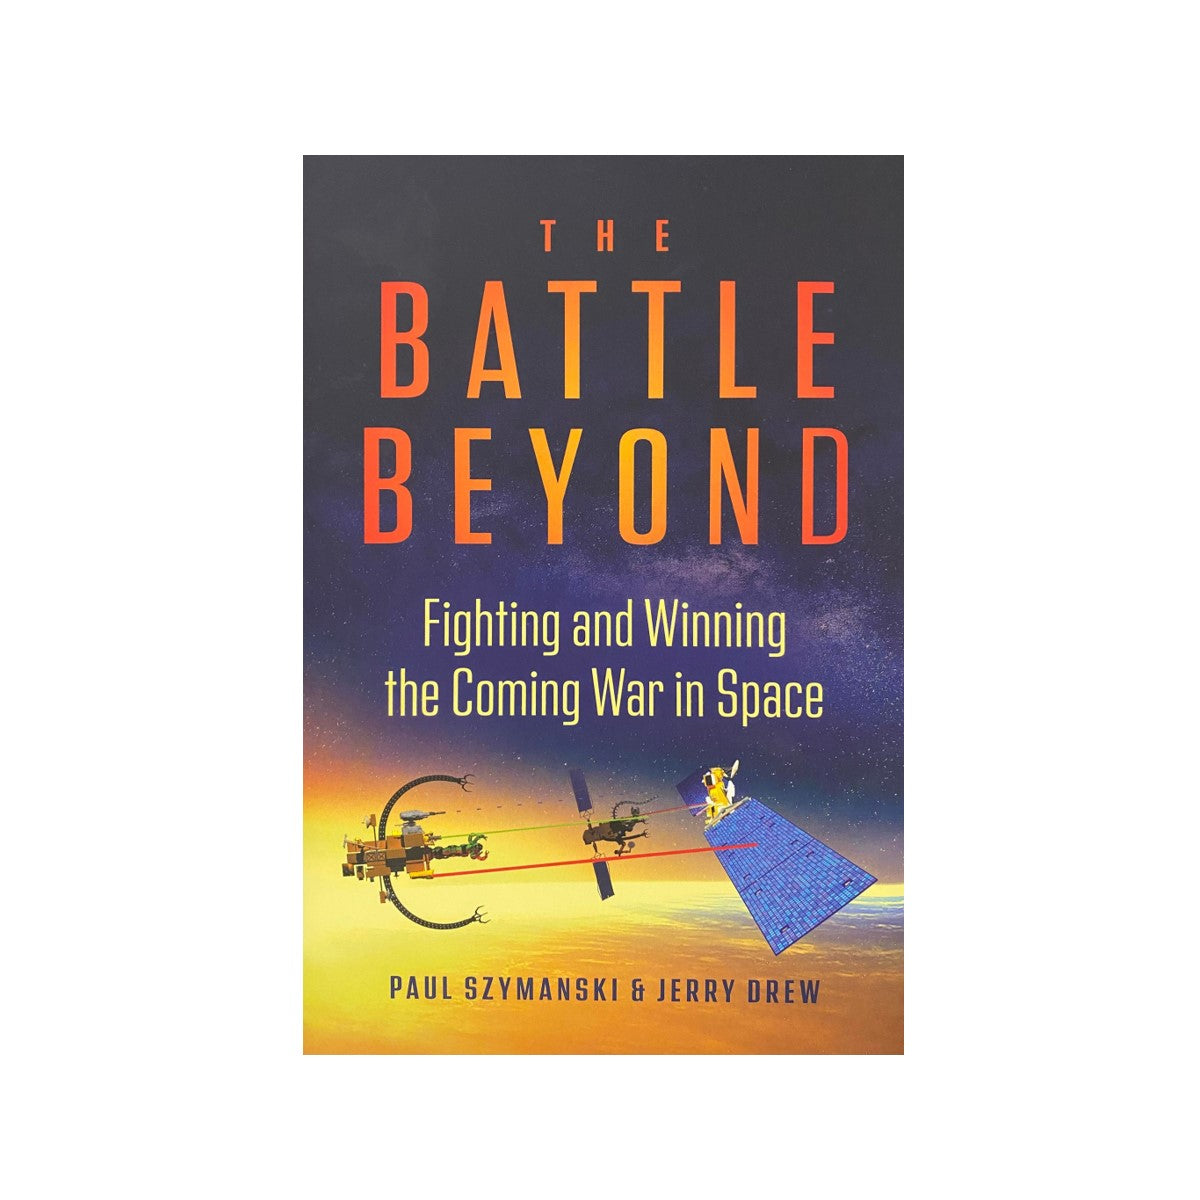 The Battle Beyond: Fighting and Winning the Coming War in Space